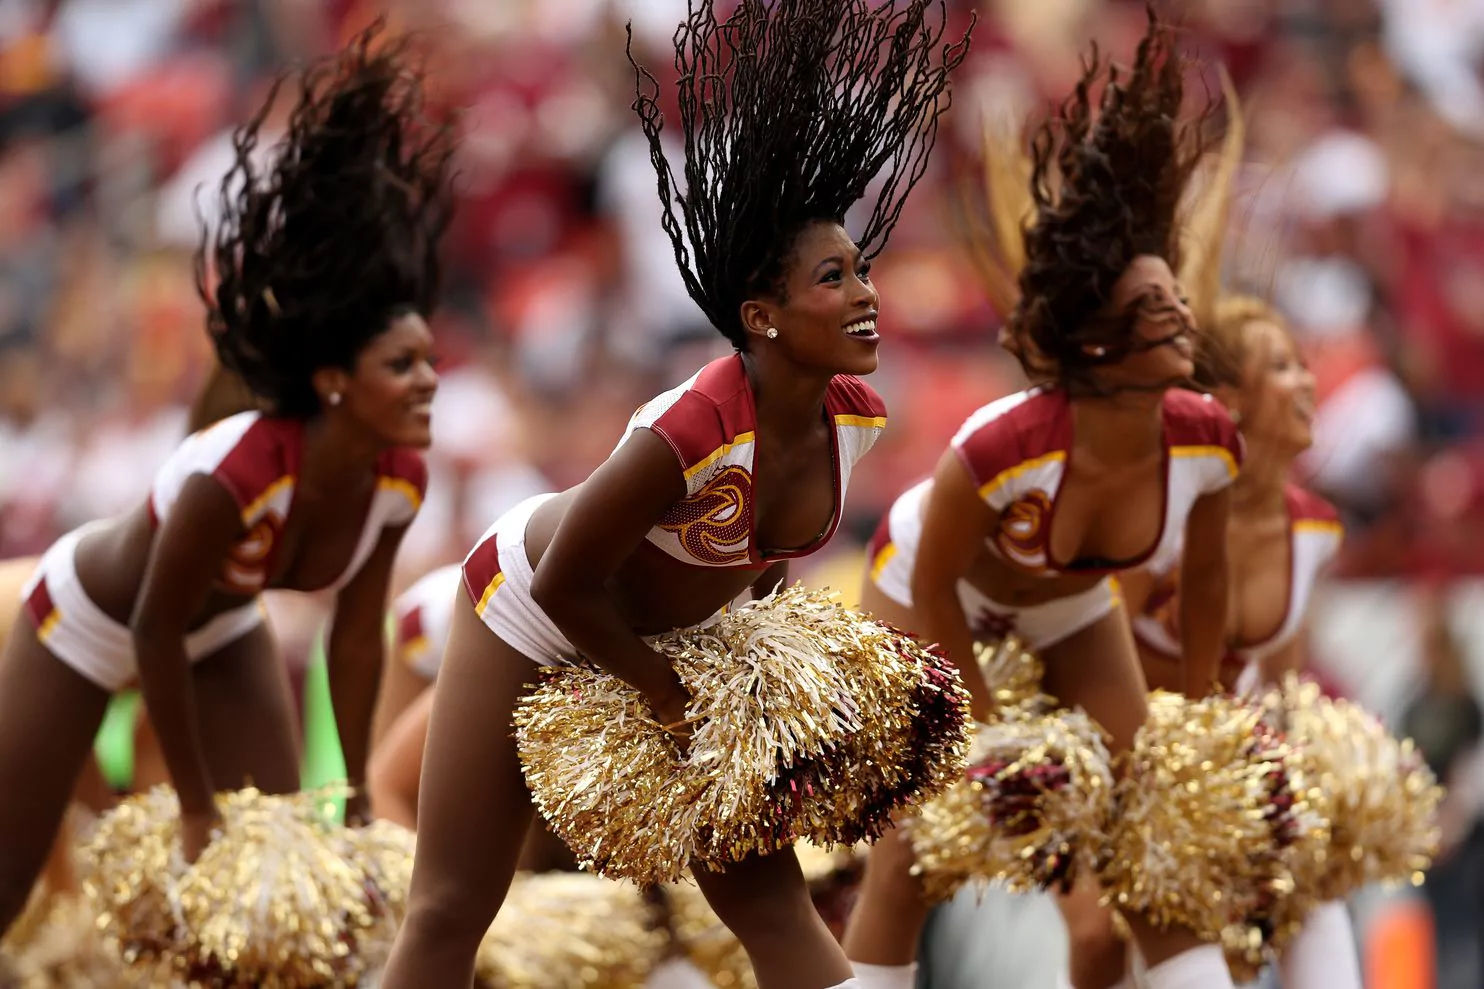 NFL cheerleaders told to pose topless, serve as personal escorts, report says Sports gazette